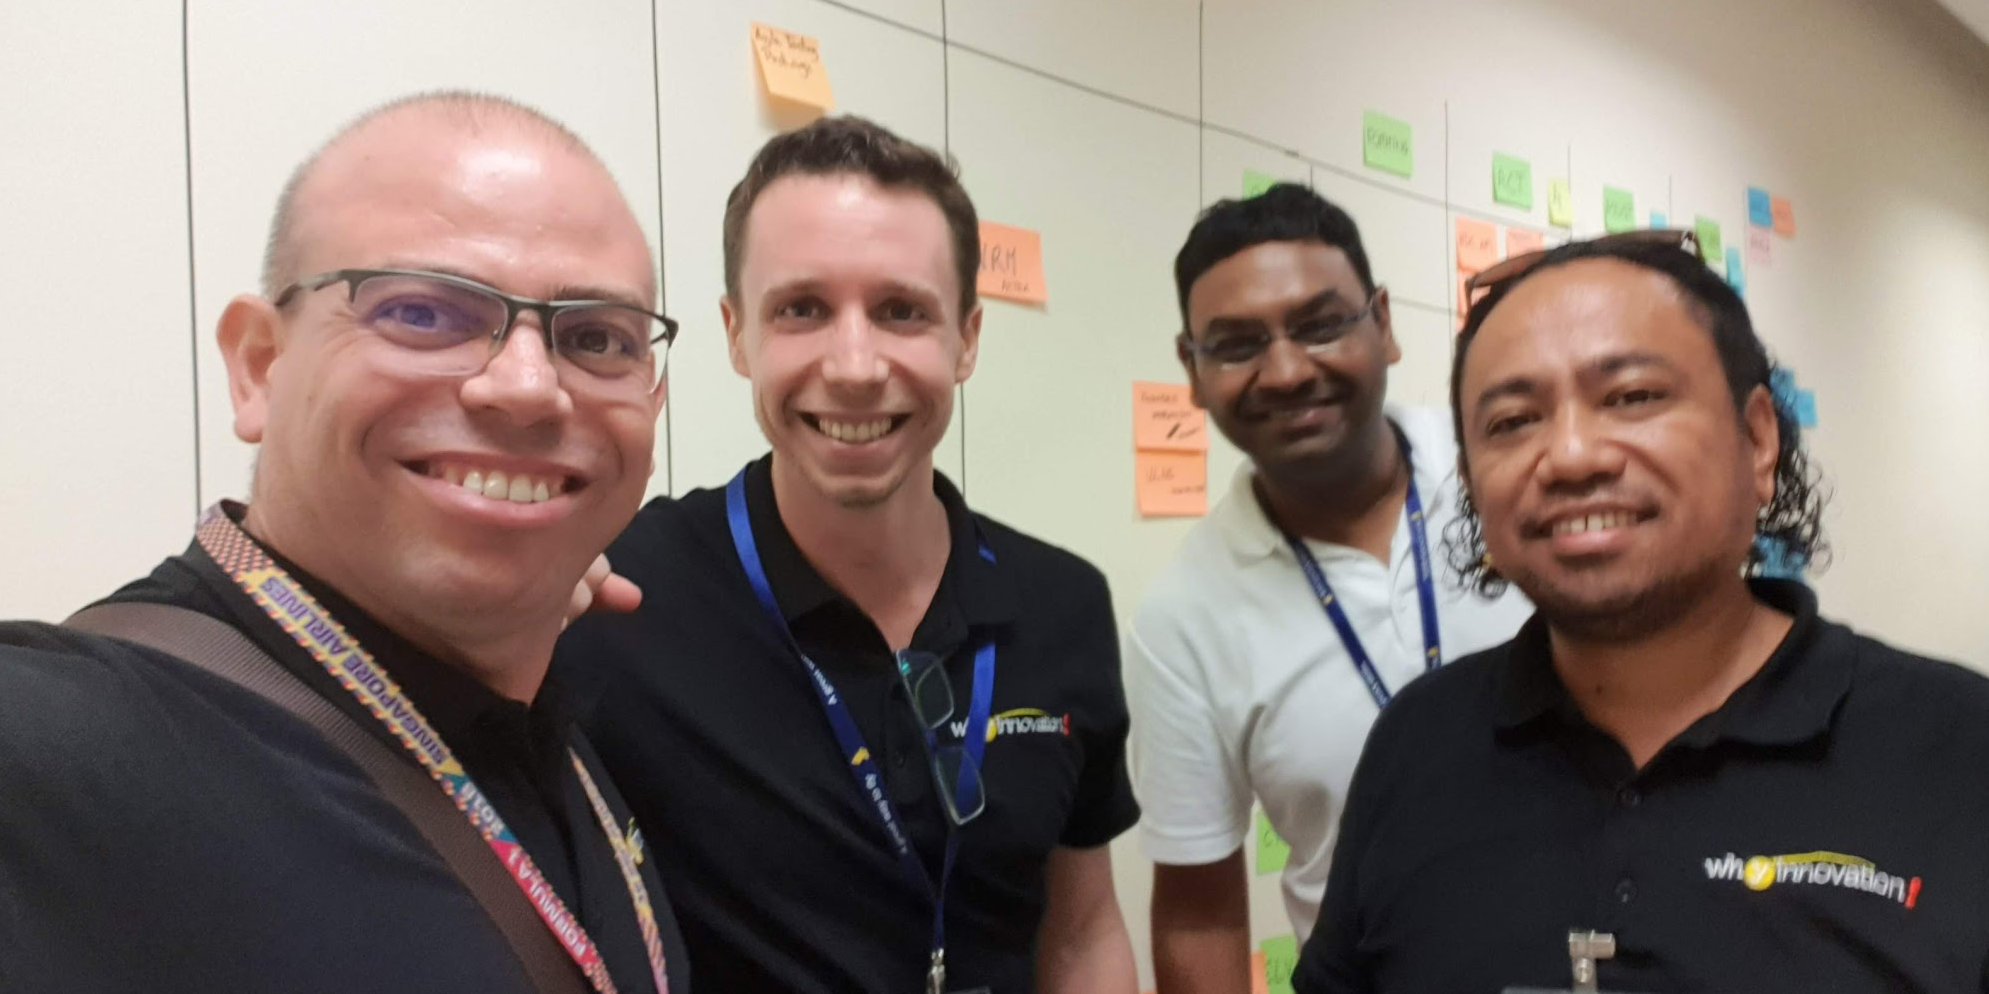 Agile transformation, why innovation! team members who led this program for a Leading global airline company in Singapore